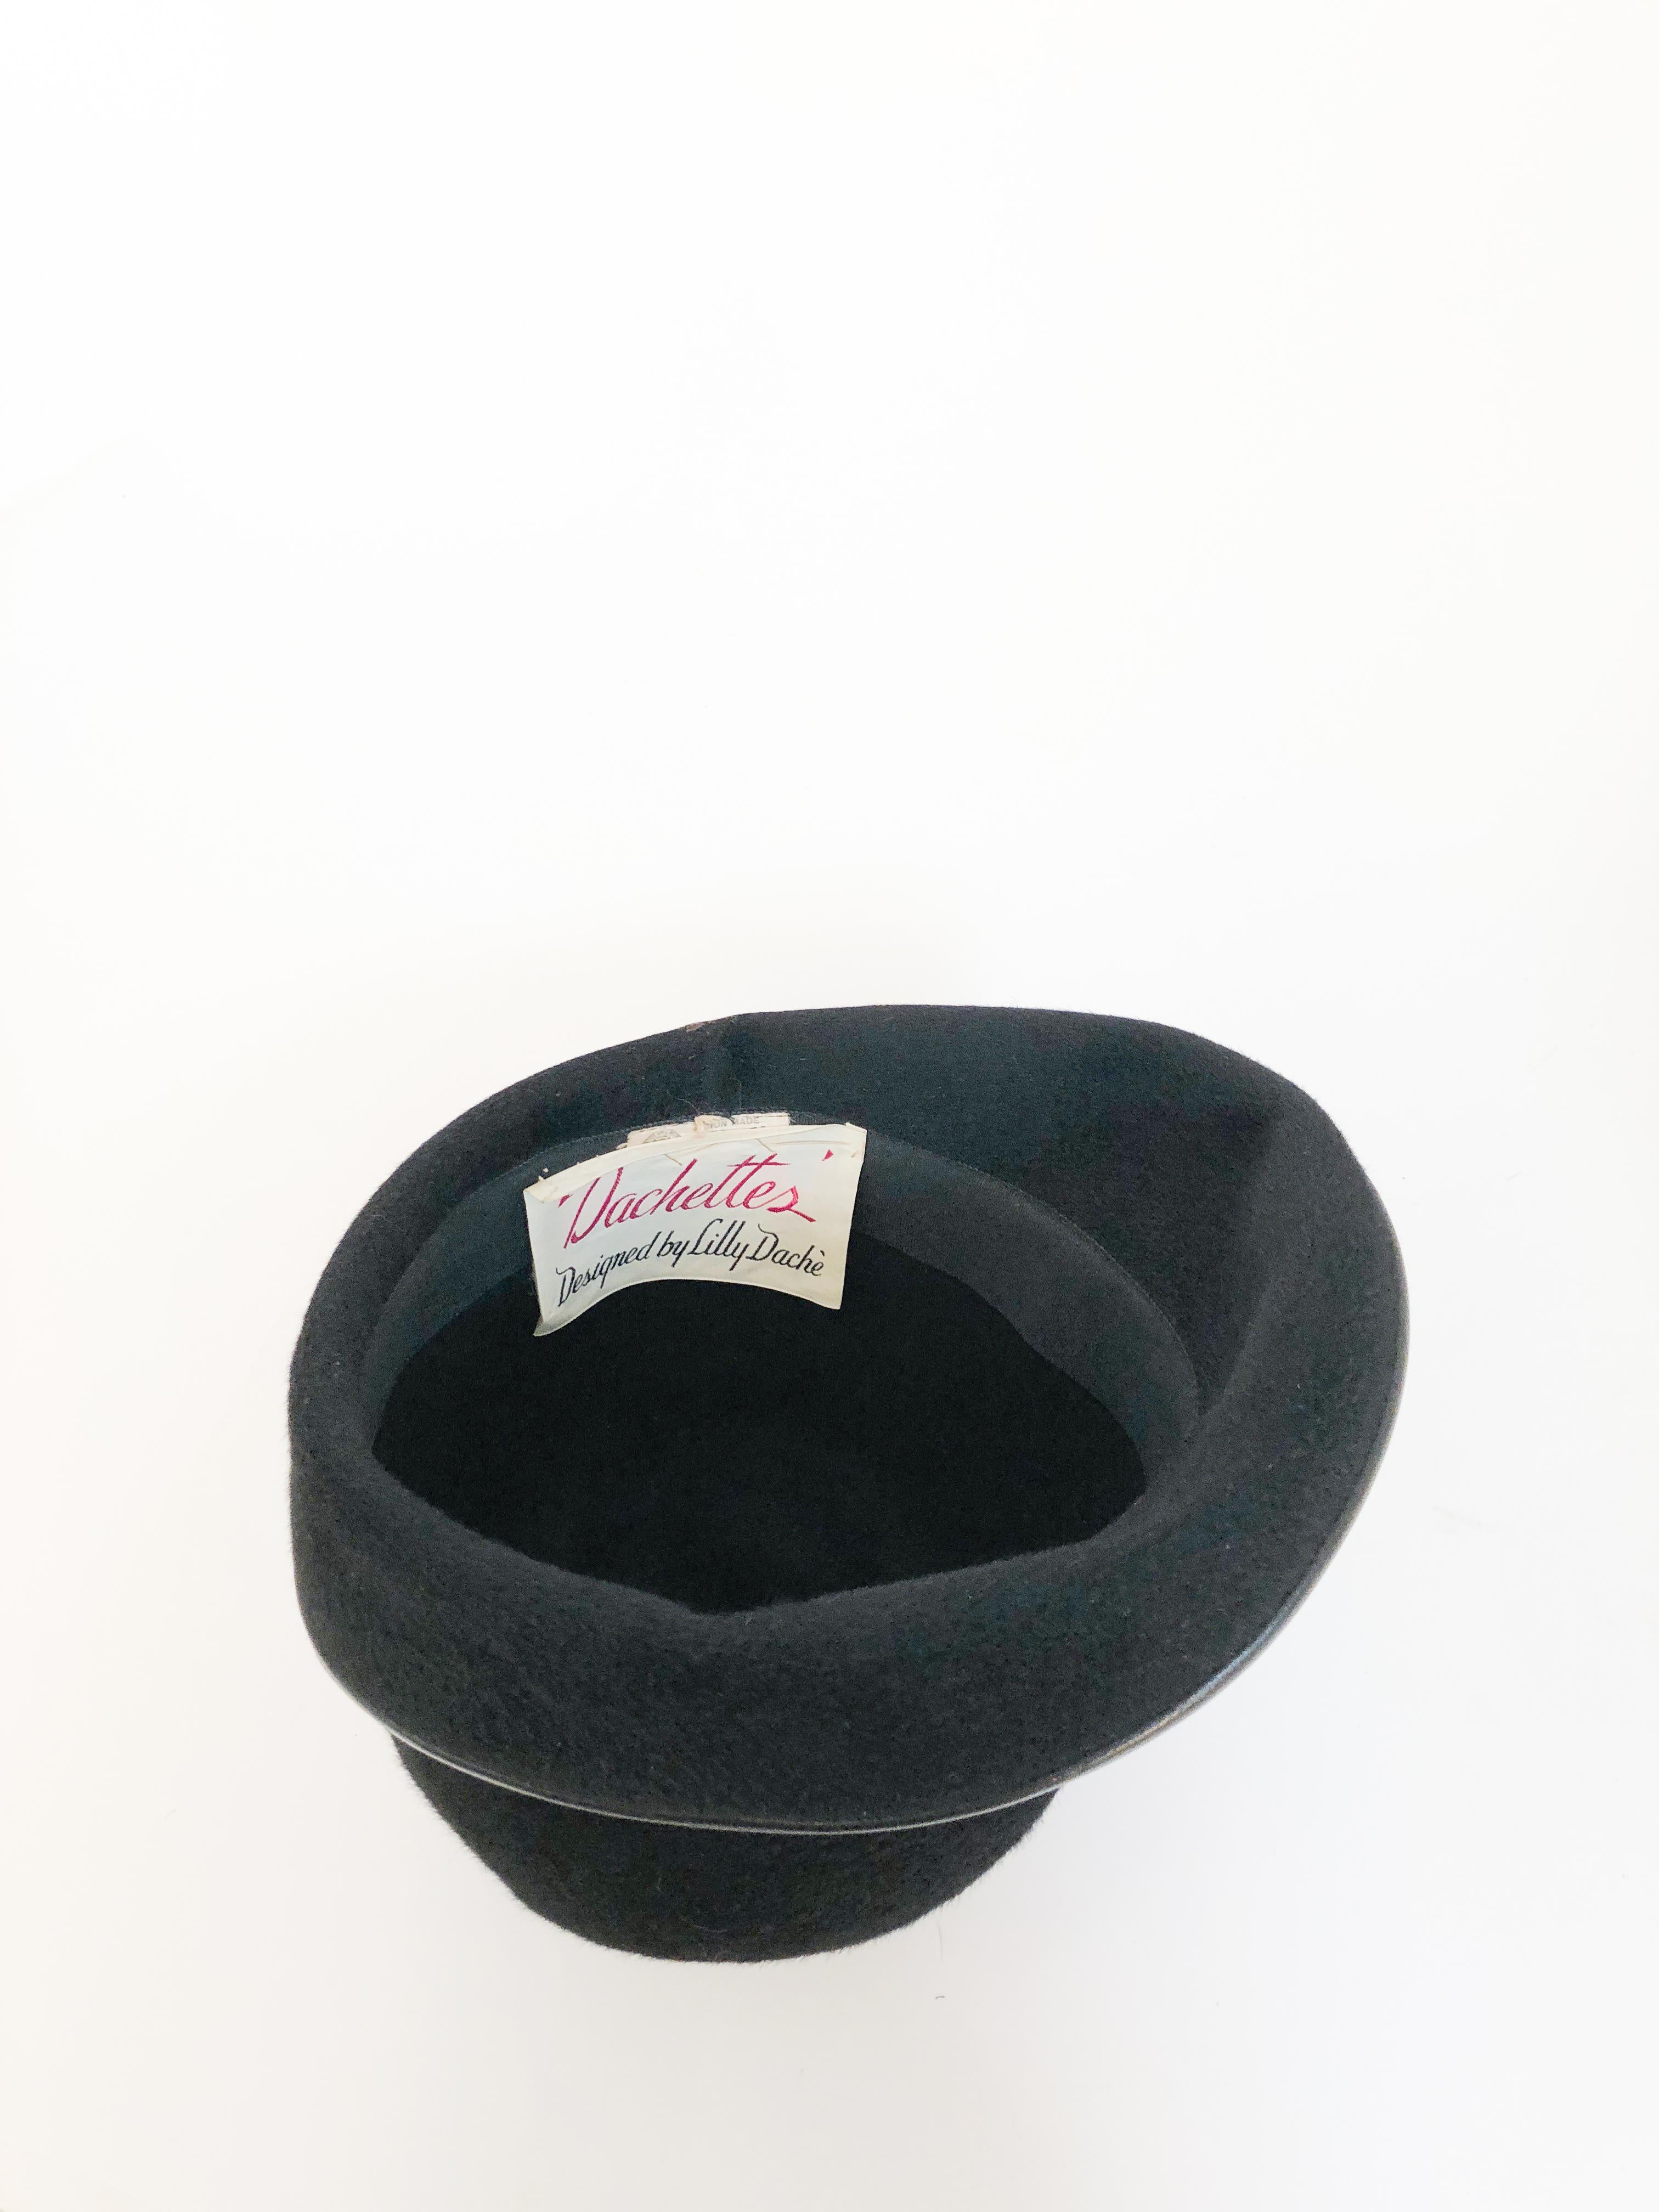 1960s Dachettes' Black Beaver Fur Felt and Pleather Hat In Good Condition For Sale In San Francisco, CA